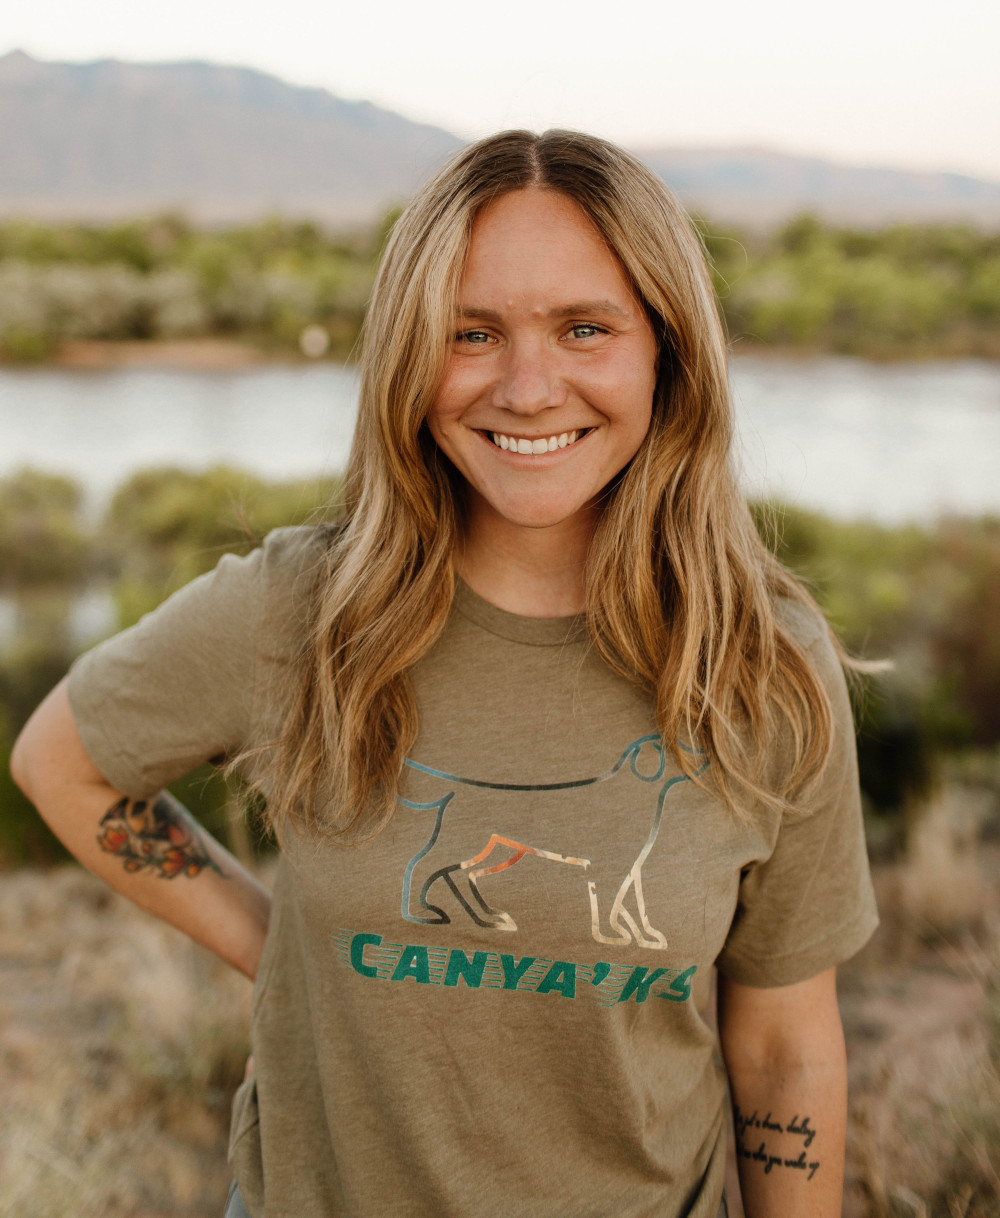 Danielle Kelly, Owner and Founder of Canya K9